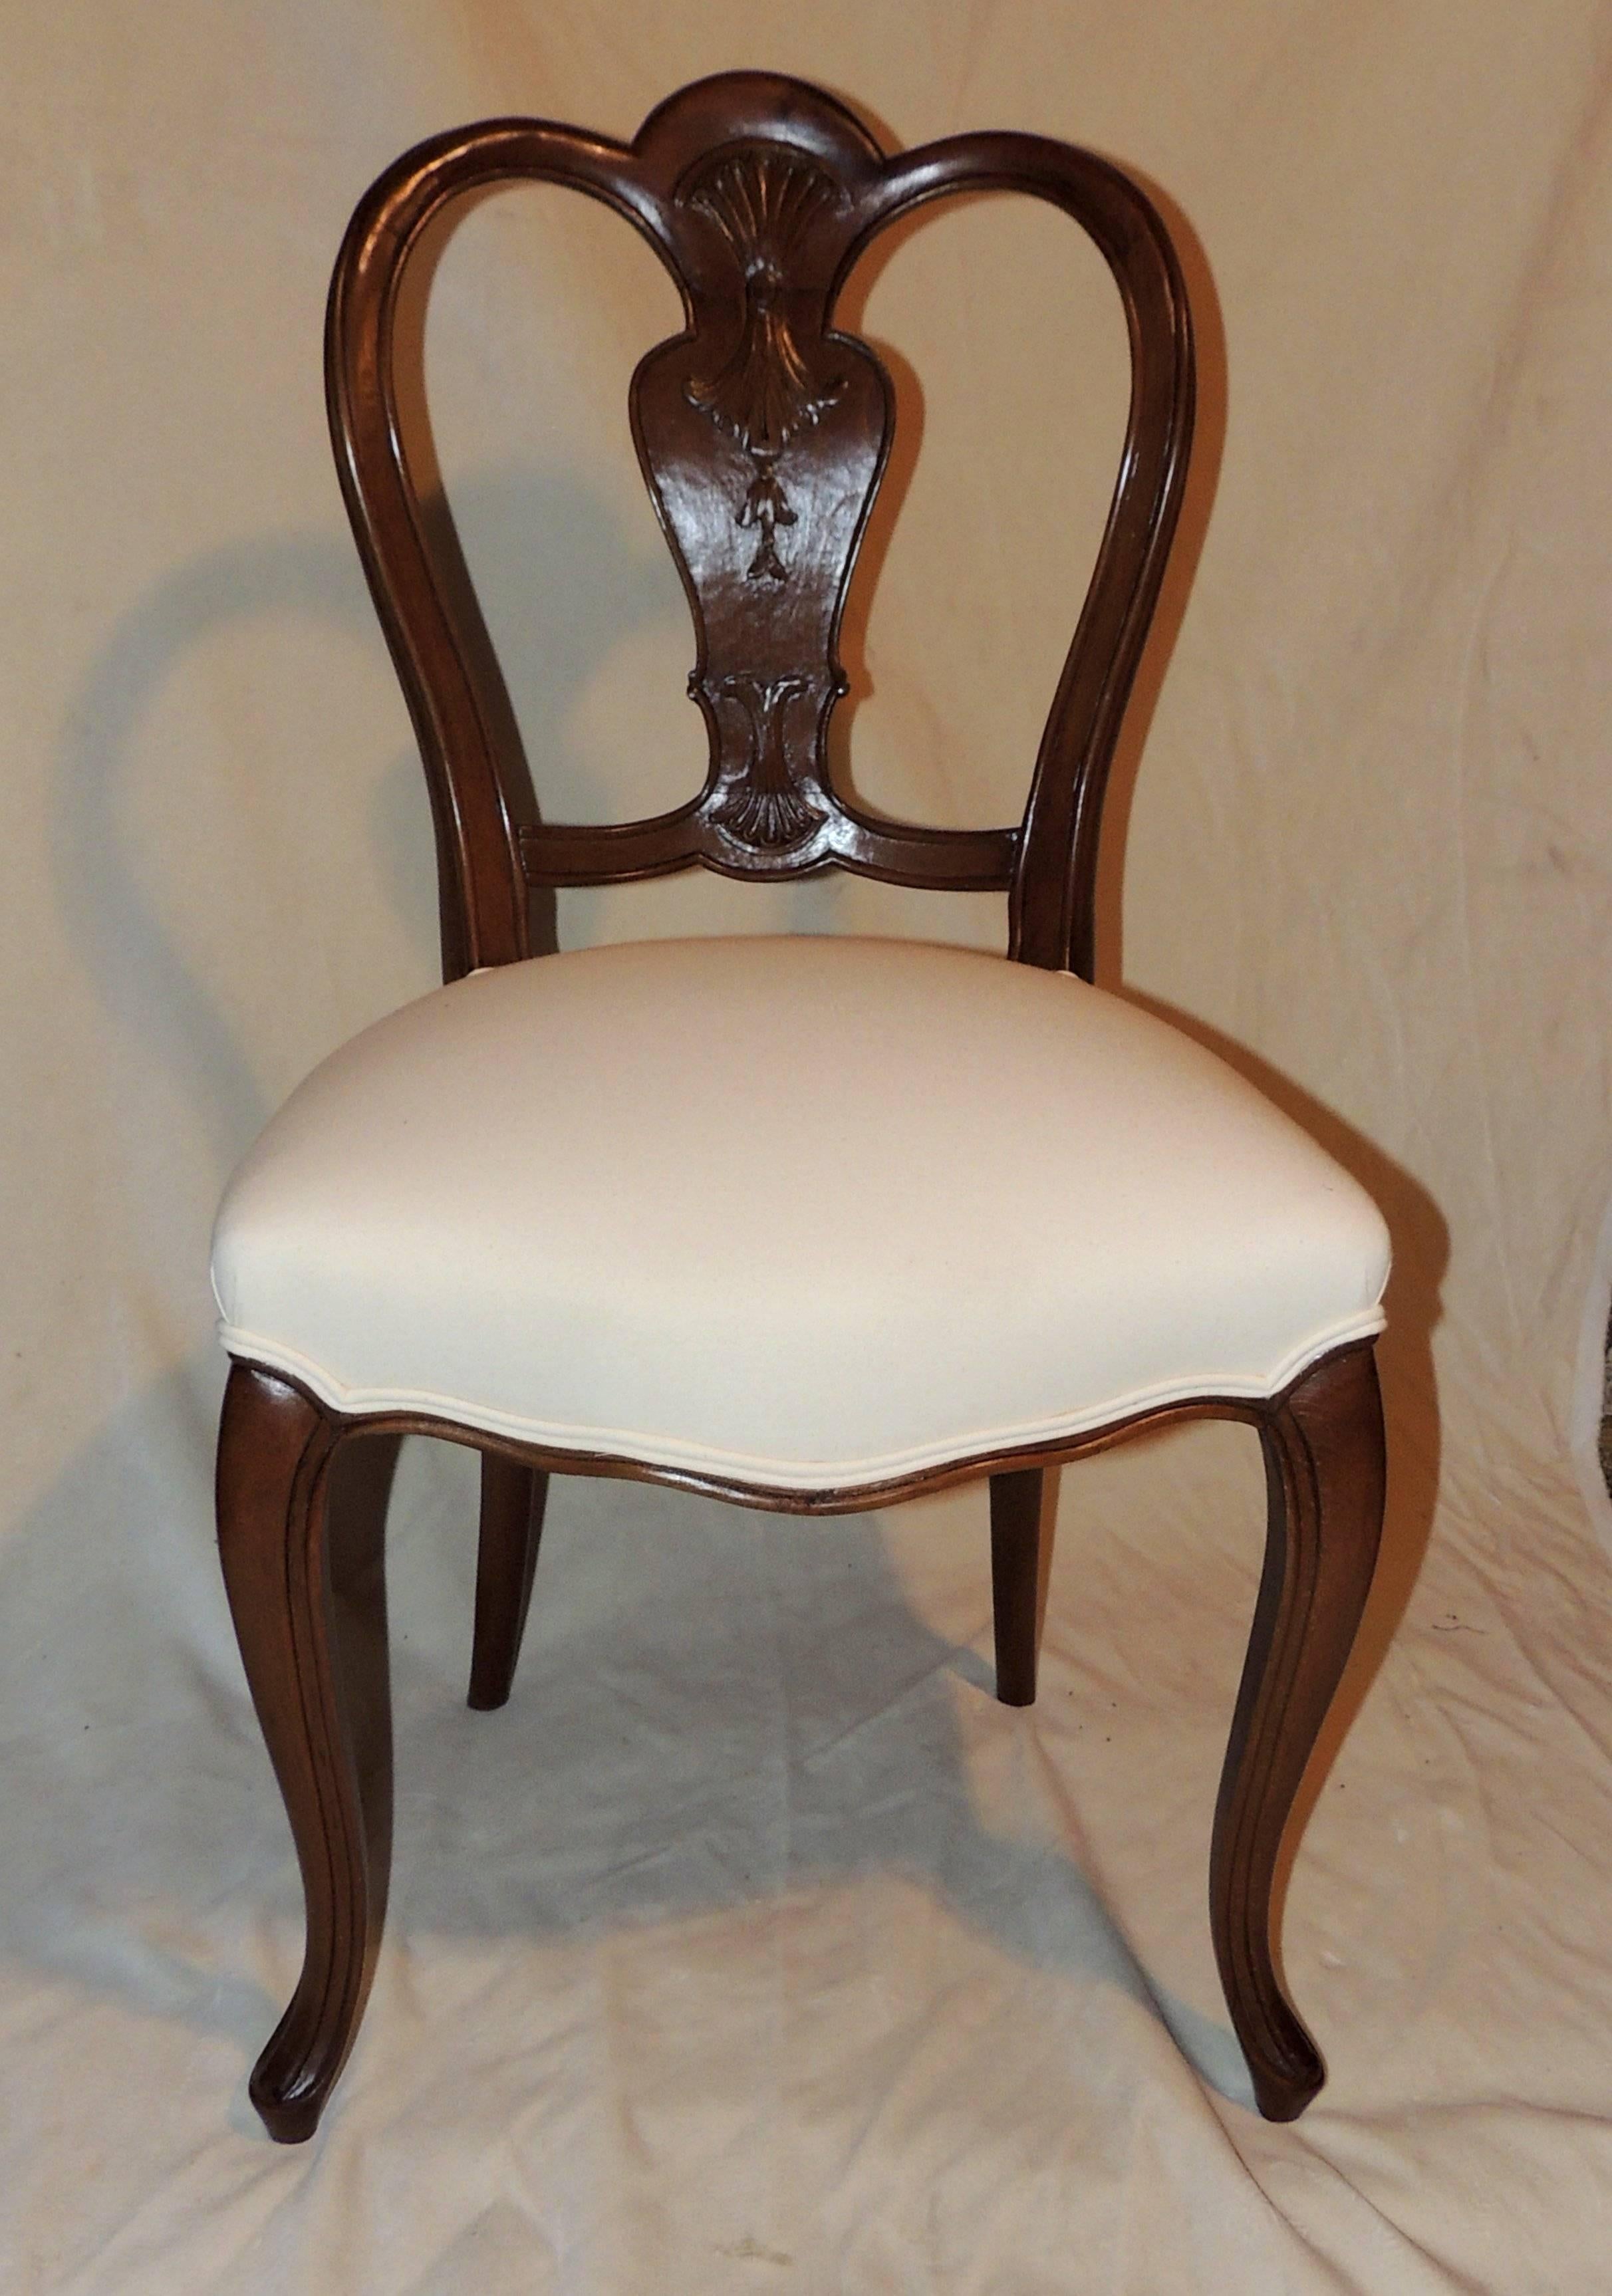 Wonderful shield back set of six French leg carved back side upholstered chairs recently refinished.

Measures: 19